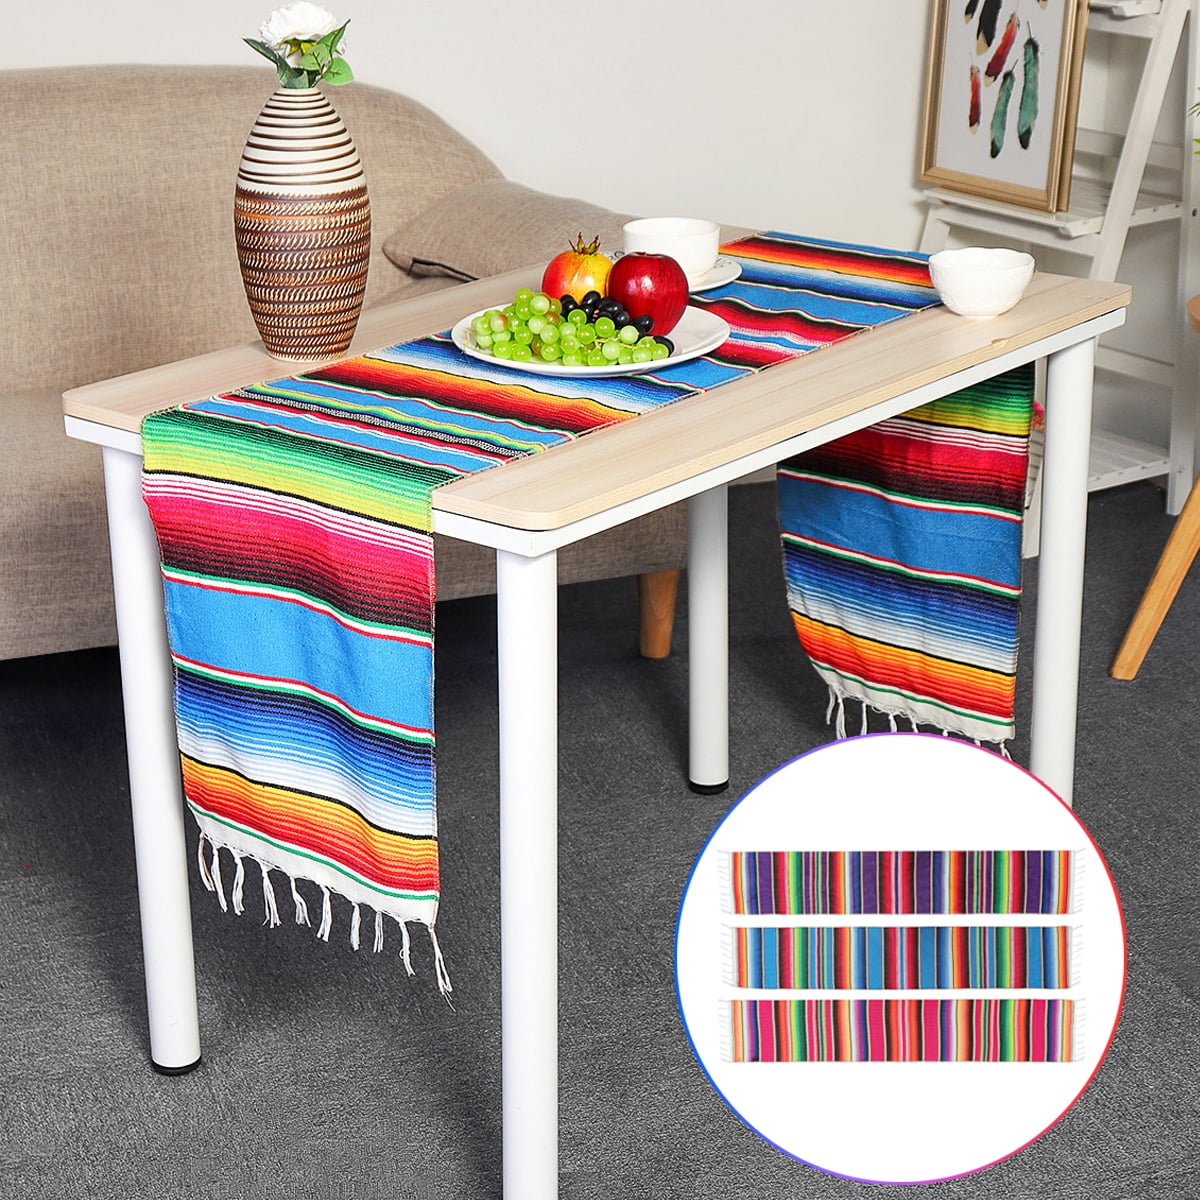 KSPOWWIN Mexican Serape Table Runner 14 x 84 inch for Mexican Party Wedding Decorations Purple Fringe Cotton Blanket Table Runner